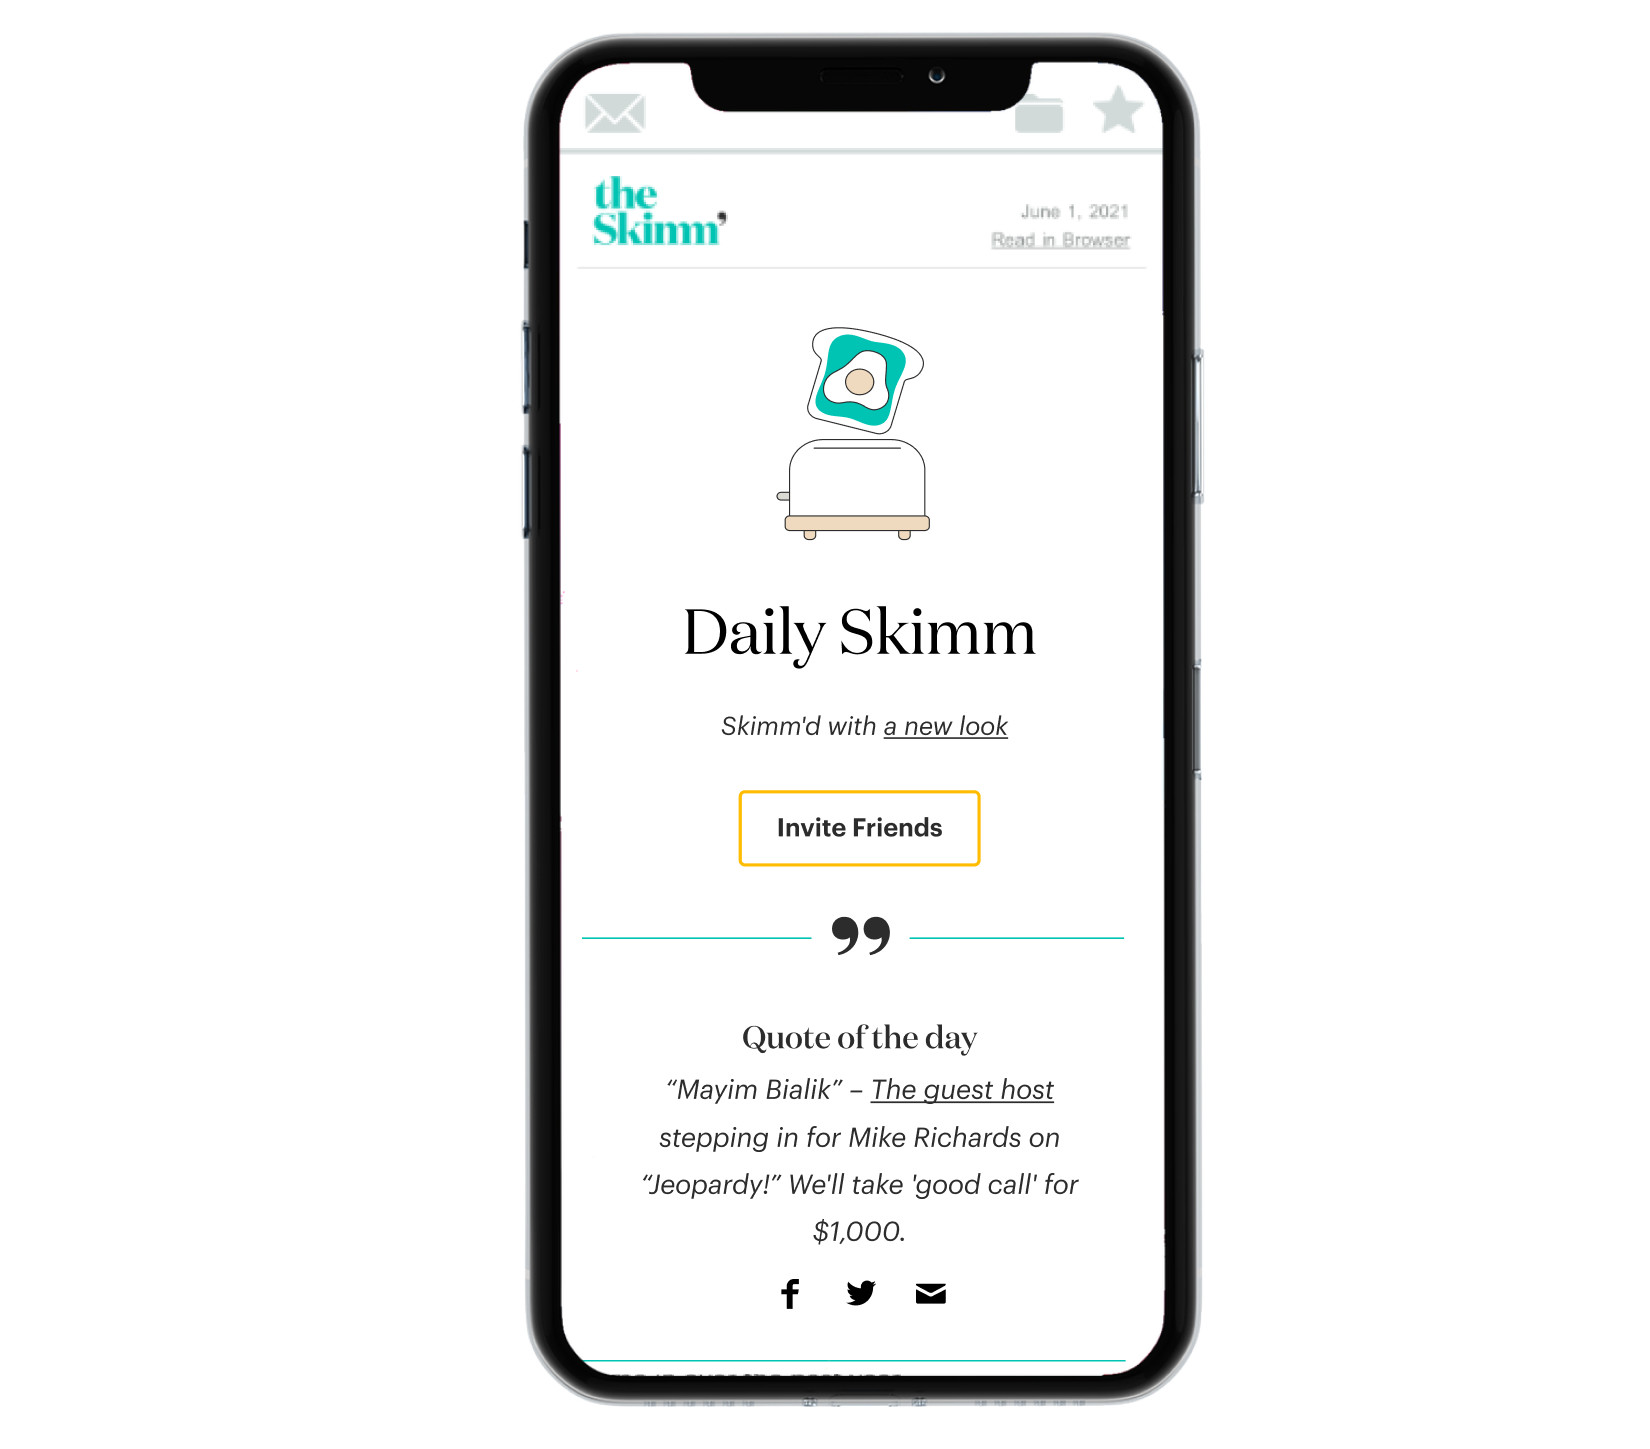 The Skimm newsletter showing on a phone